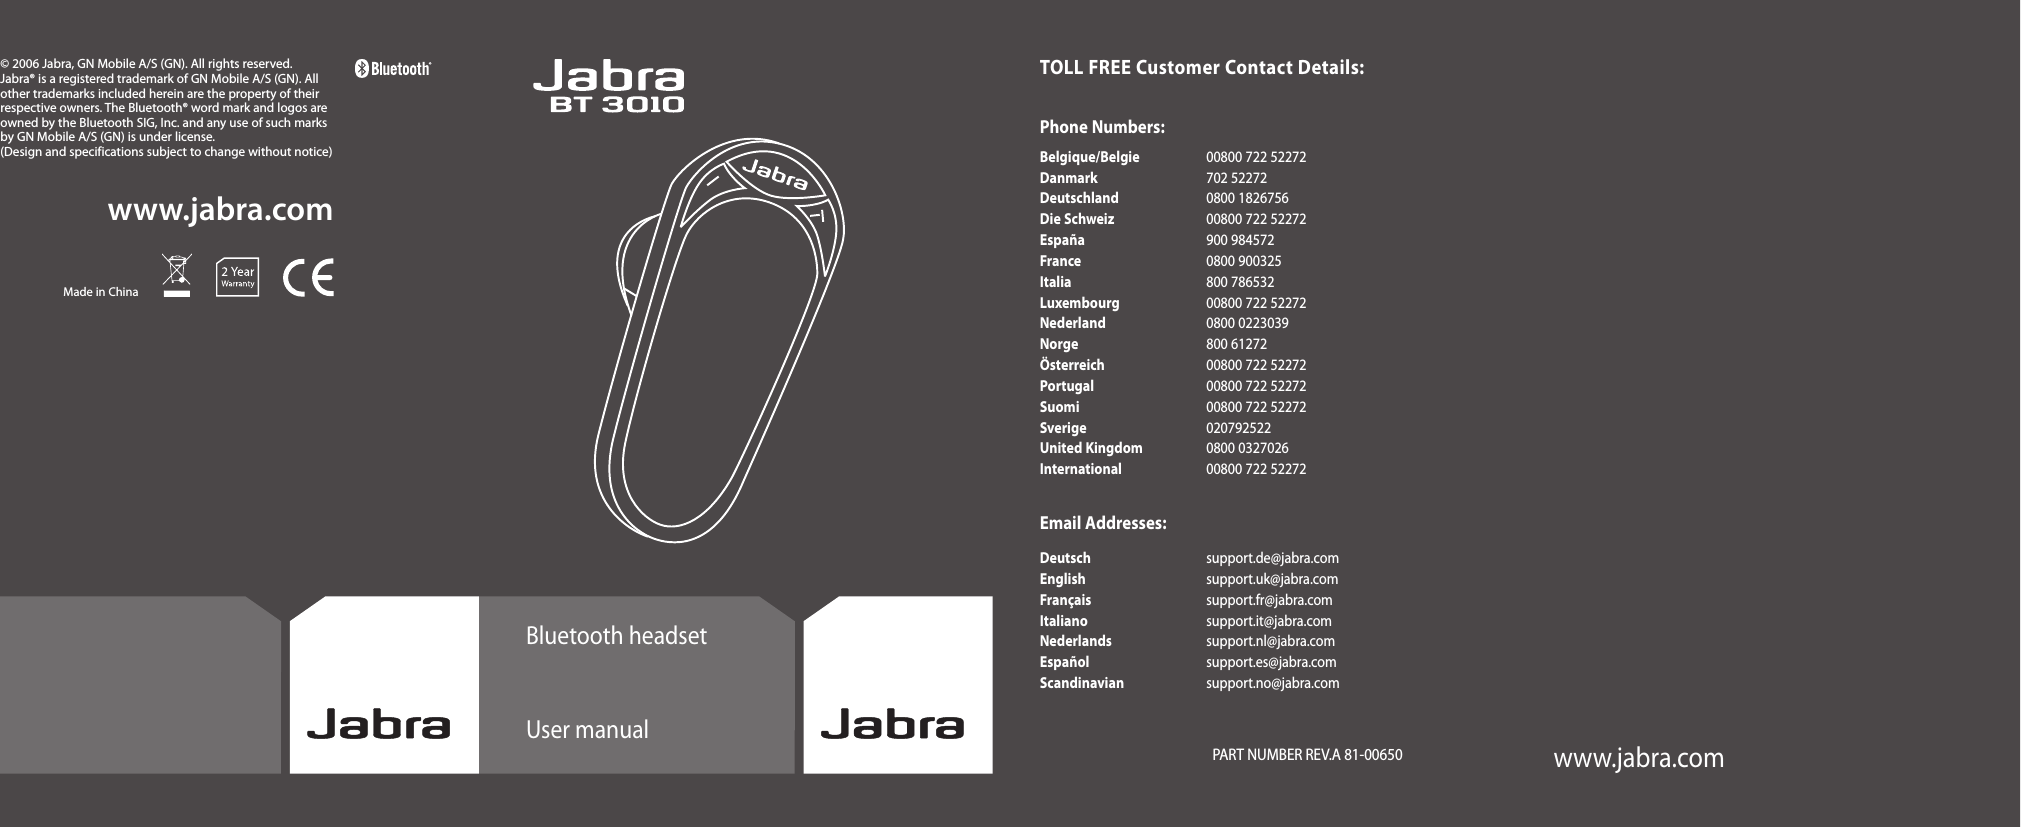 www.jabra.comwww.jabra.com© 2006 Jabra, GN Mobile A/S (GN). All rights reserved. Jabra® is a registered trademark of GN Mobile A/S (GN). All other trademarks included herein are the property of their respective owners. The Bluetooth® word mark and logos are owned by the Bluetooth SIG, Inc. and any use of such marks by GN Mobile A/S (GN) is under license.(Design and specifications subject to change without notice)Made in ChinaBluetooth headsetUser manualTOLL FREE Customer Contact Details:Phone Numbers:Belgique/Belgie  00800 722 52272 Danmark  702 52272 Deutschland  0800 1826756 Die Schweiz  00800 722 52272 España  900 984572 France  0800 900325 Italia  800 786532 Luxembourg  00800 722 52272 Nederland  0800 0223039 Norge  800 61272 Österreich  00800 722 52272 Portugal  00800 722 52272 Suomi  00800 722 52272 Sverige  020792522 United Kingdom  0800 0327026 International  00800 722 52272Email Addresses:Deutsch  support.de@jabra.com English  support.uk@jabra.com Français  support.fr@jabra.com Italiano  support.it@jabra.com Nederlands  support.nl@jabra.com Español  support.es@jabra.com Scandinavian  support.no@jabra.comwww.jabra.com   PART NUMBER REV.A 81-00650